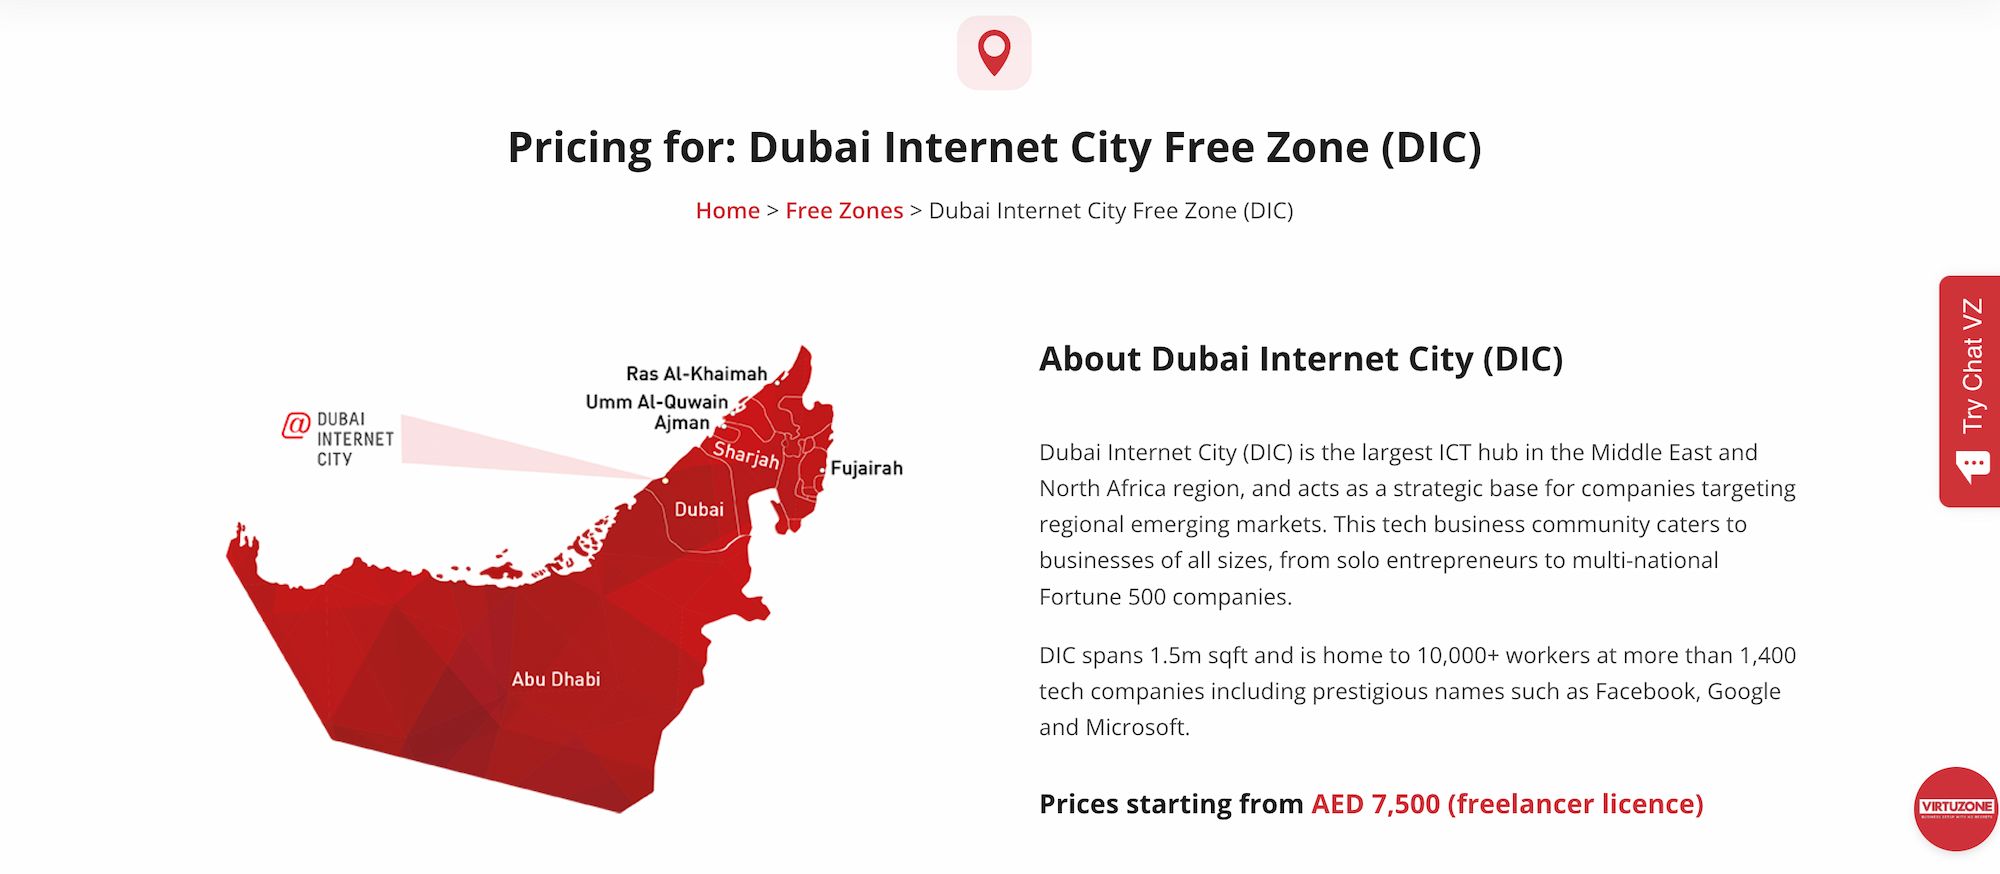 An overview and pricing information of the Dubai Internet City Free Zone.